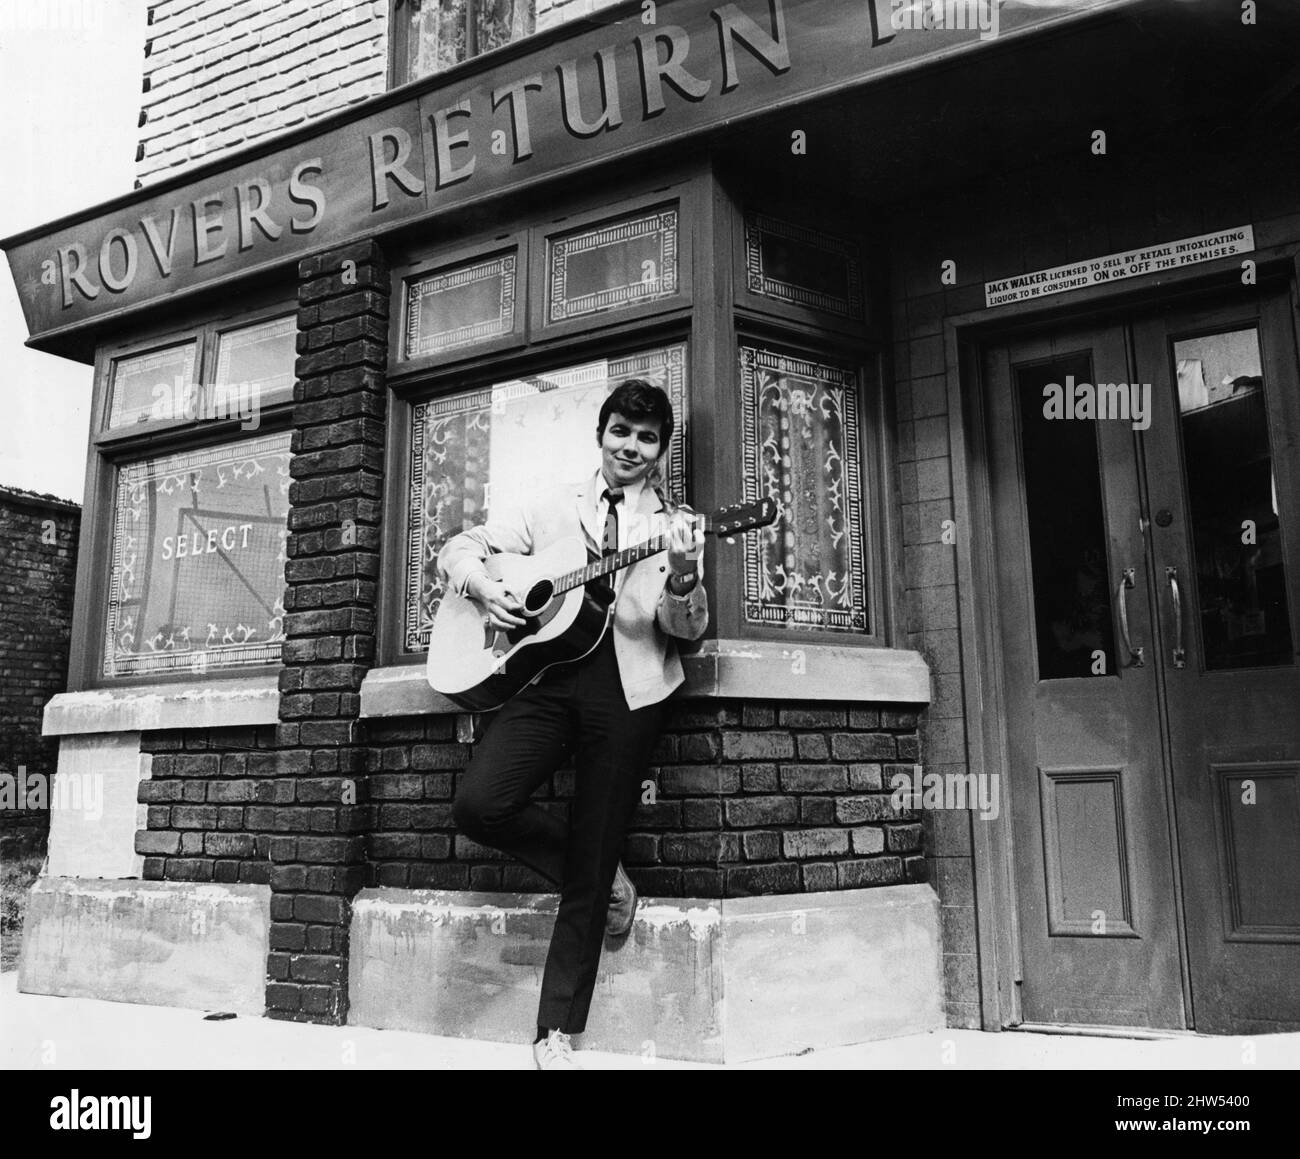 Actor Bill Kenwright who plays Gordon Clegg in the television soap opera Cornation Street, poses in the famous street with his guitar shortly before the release of his new record which he will sing on the programme.  23rd July 1968. Stock Photo